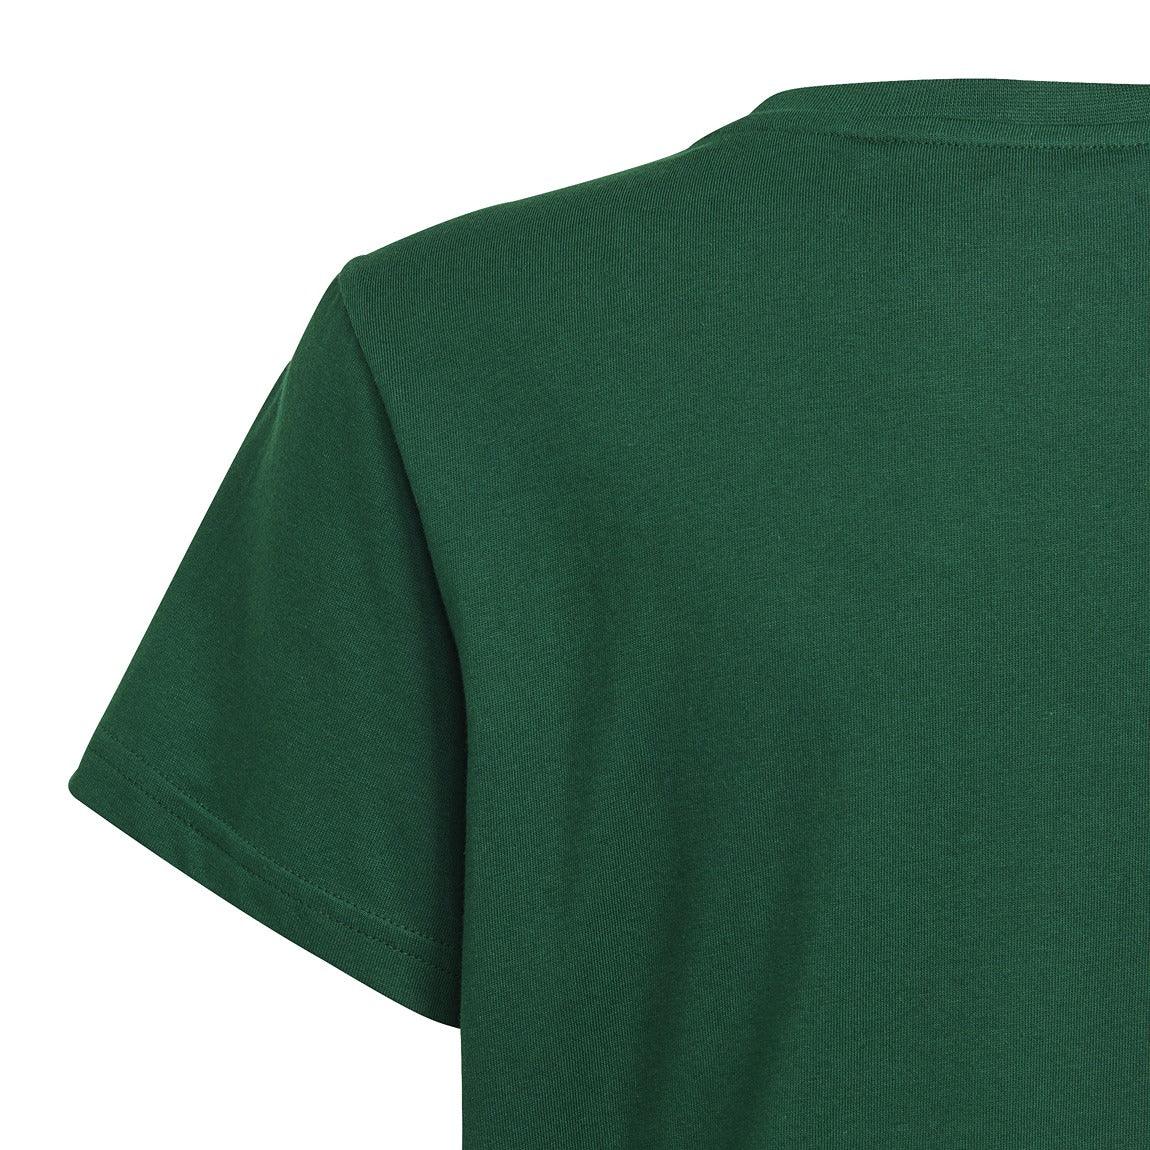 Trefoil T-Shirt - Youth - Sports Excellence